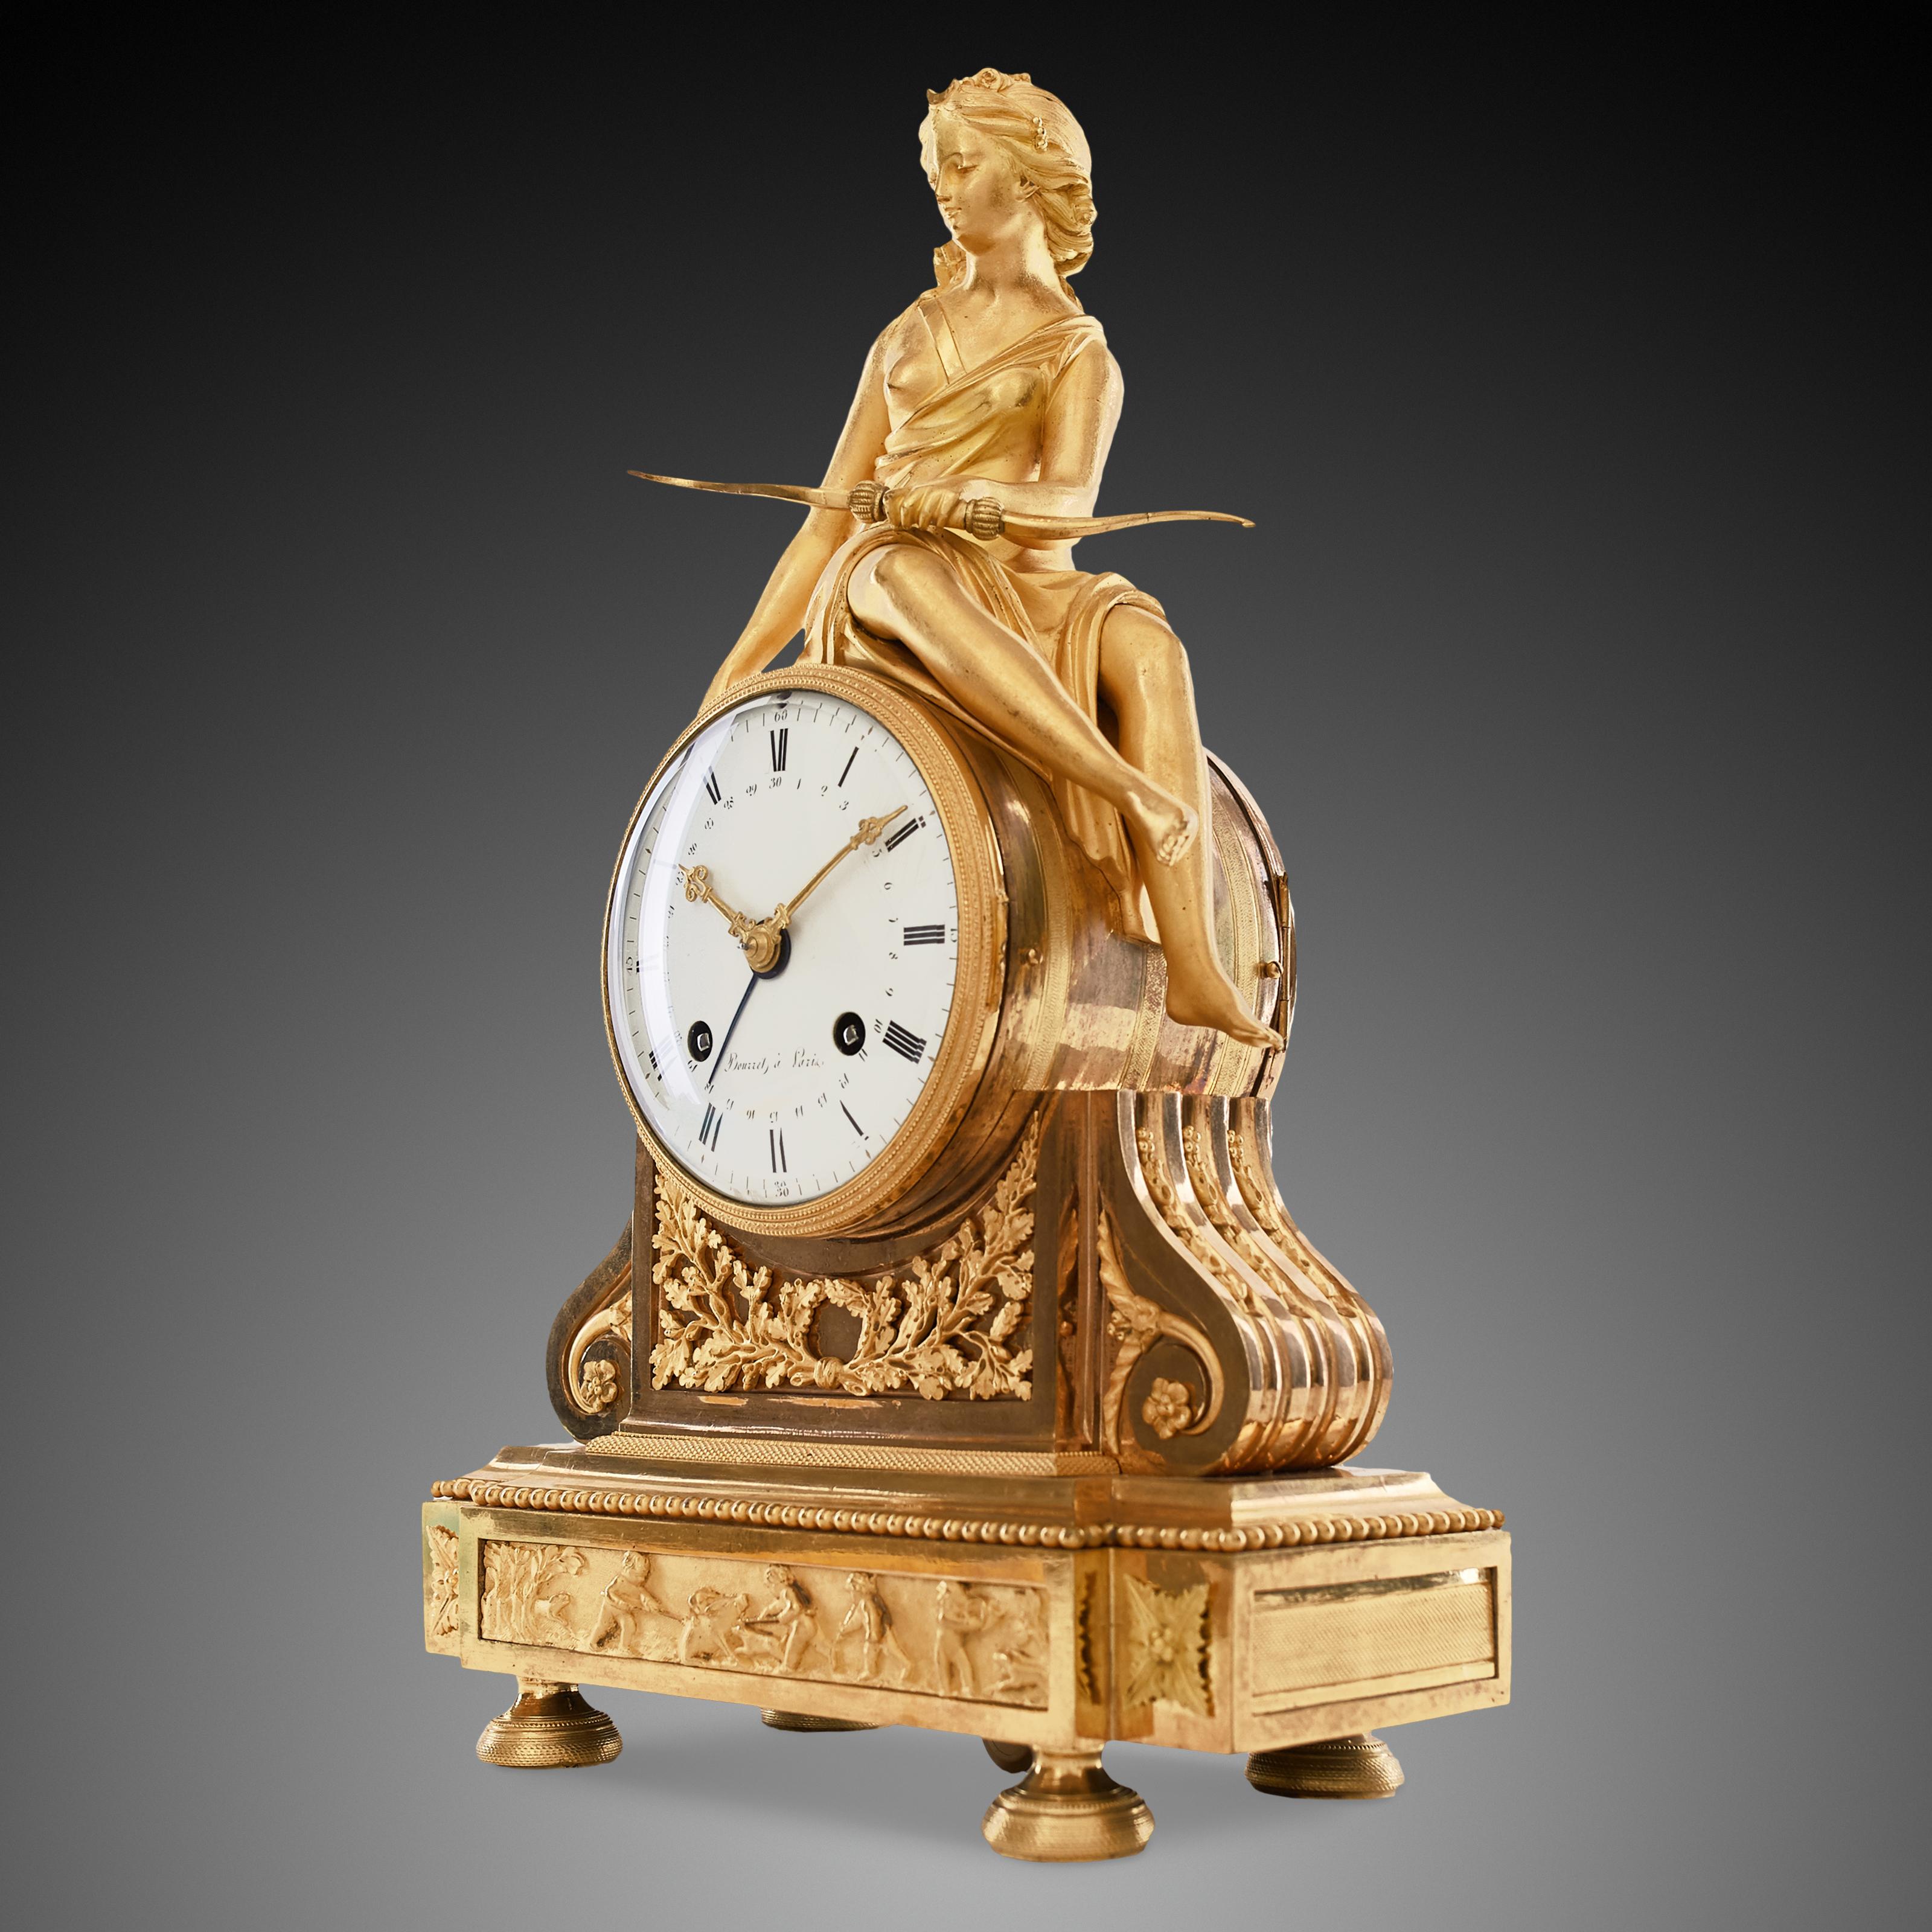 The mantel clock, made of ormol (gilded bronze), shows the beautiful figure of Diana, the Roman goddess of the hunt, accompanied by various emblems. Diana is sitting on the circular clock envelope, holding an arrow with her left hand and a dead bird